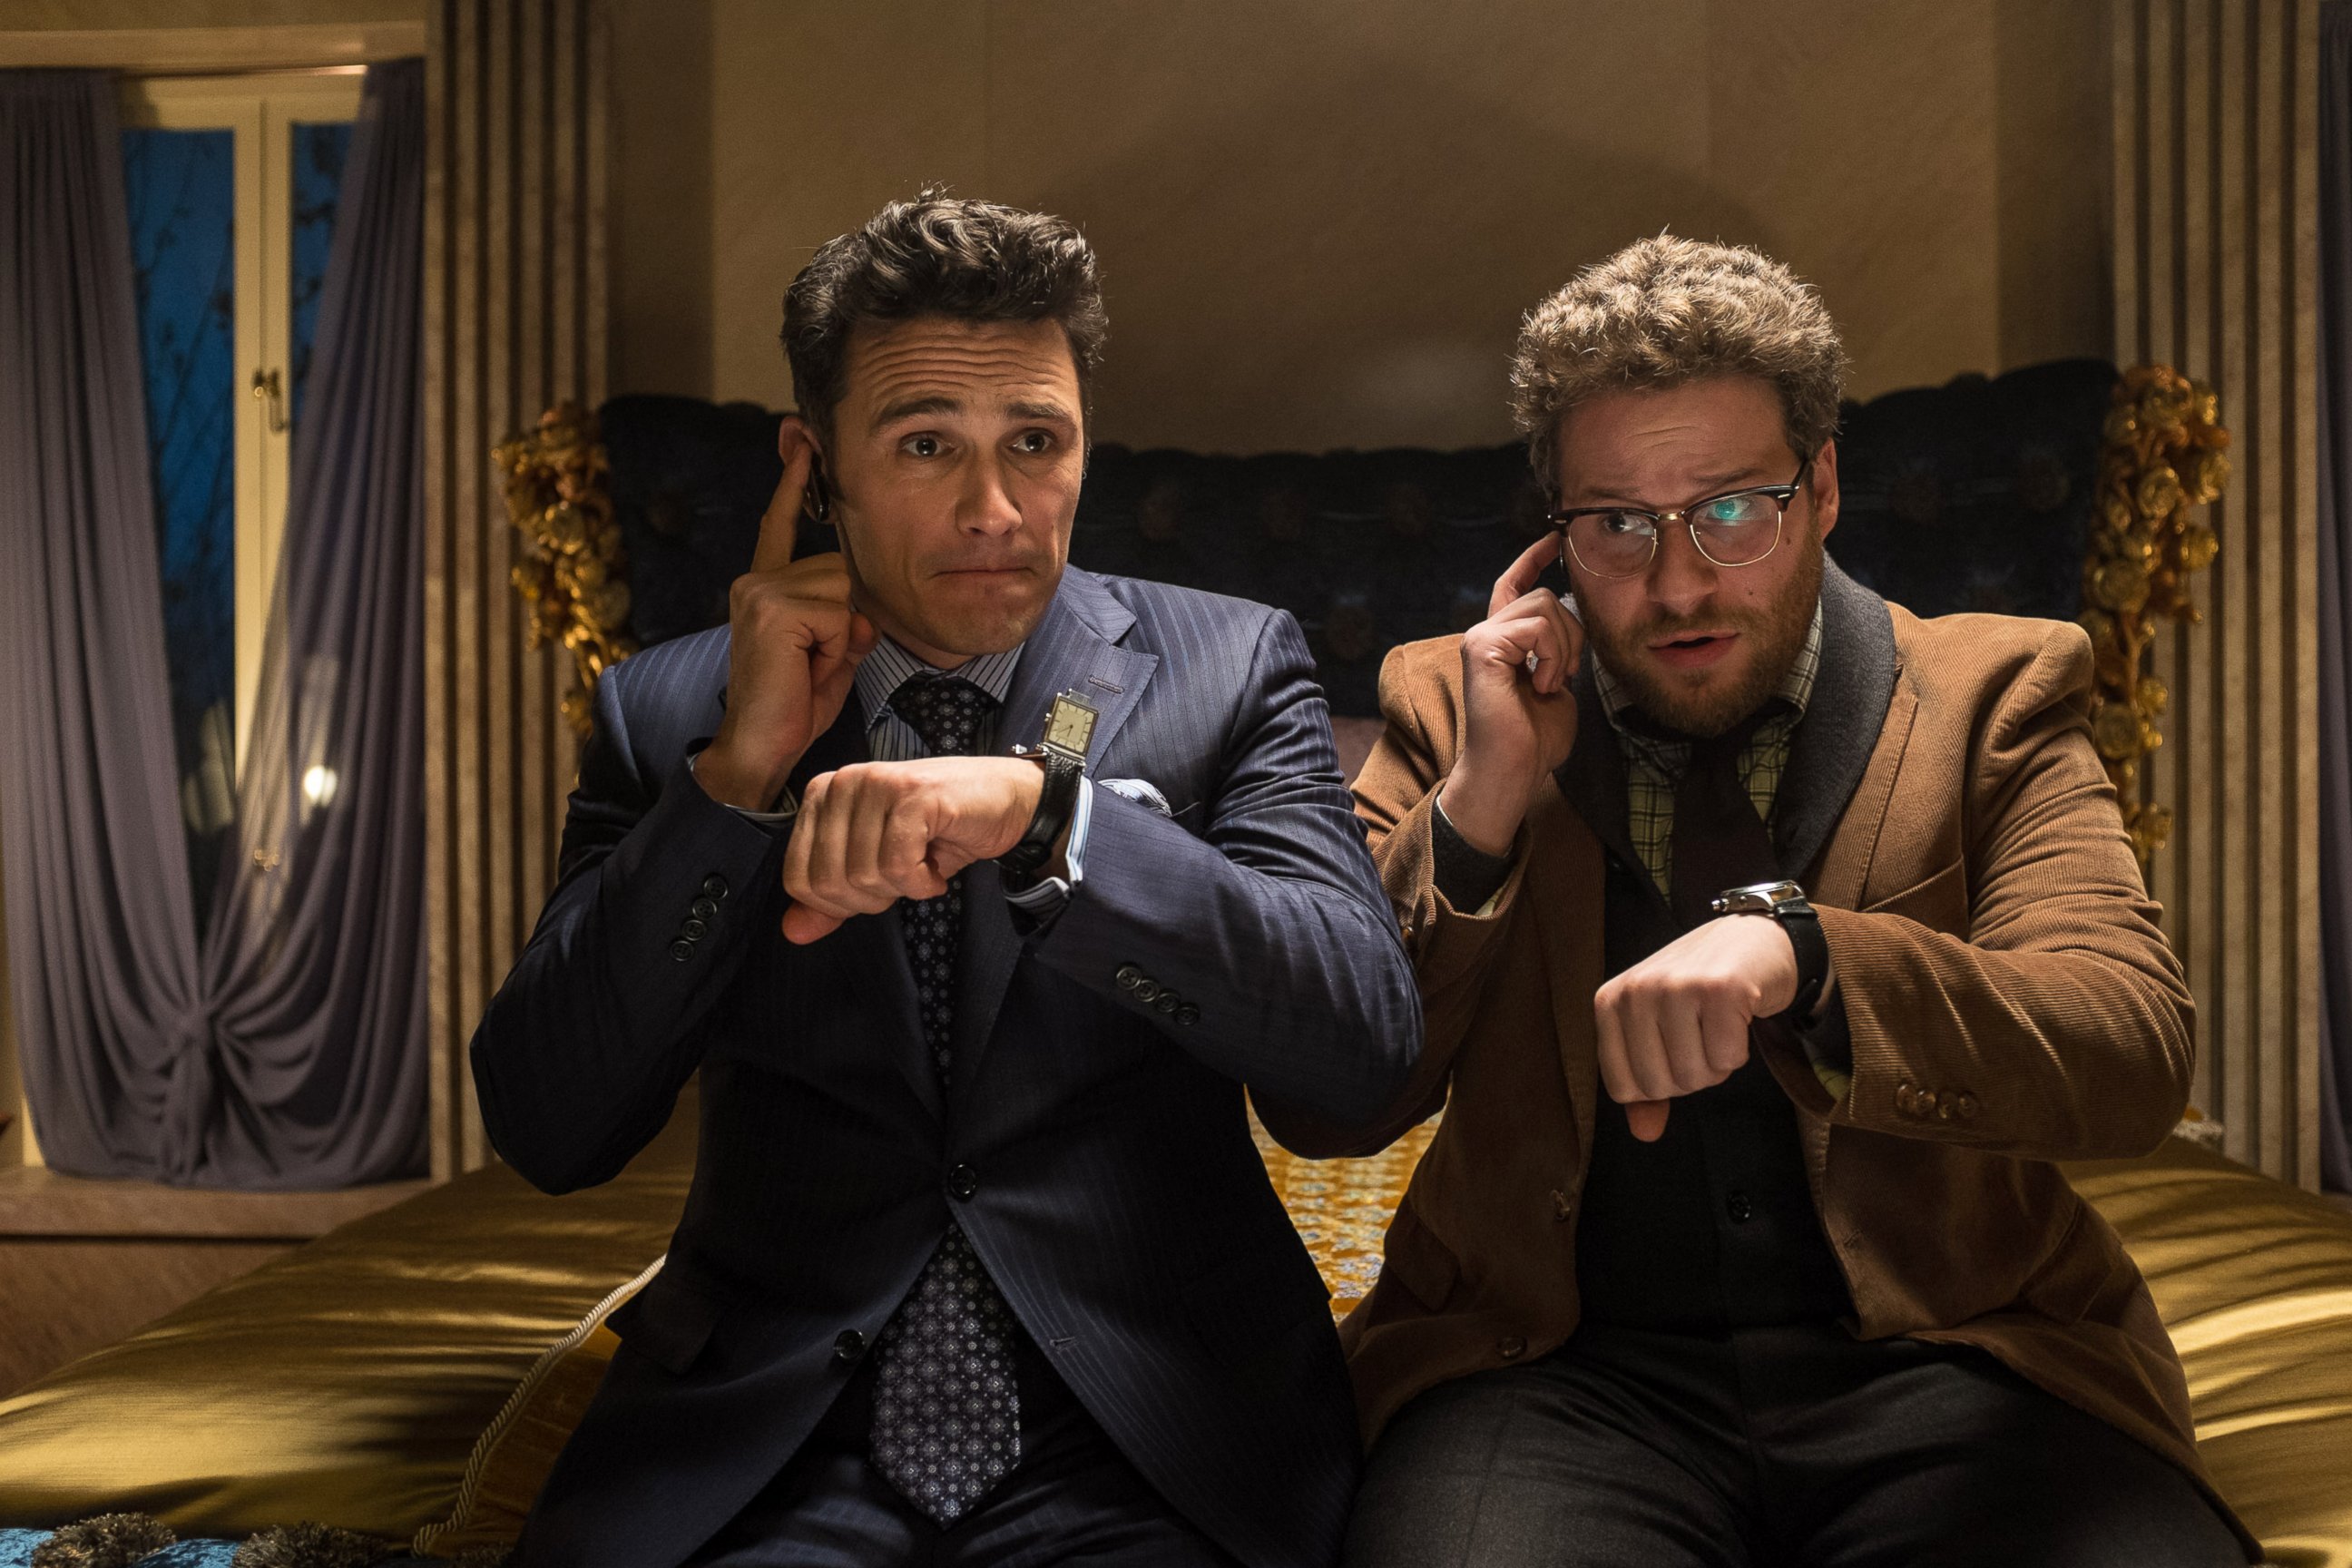 PHOTO: This image released by Columbia Pictures shows James Franco and Seth Rogen in "The Interview."